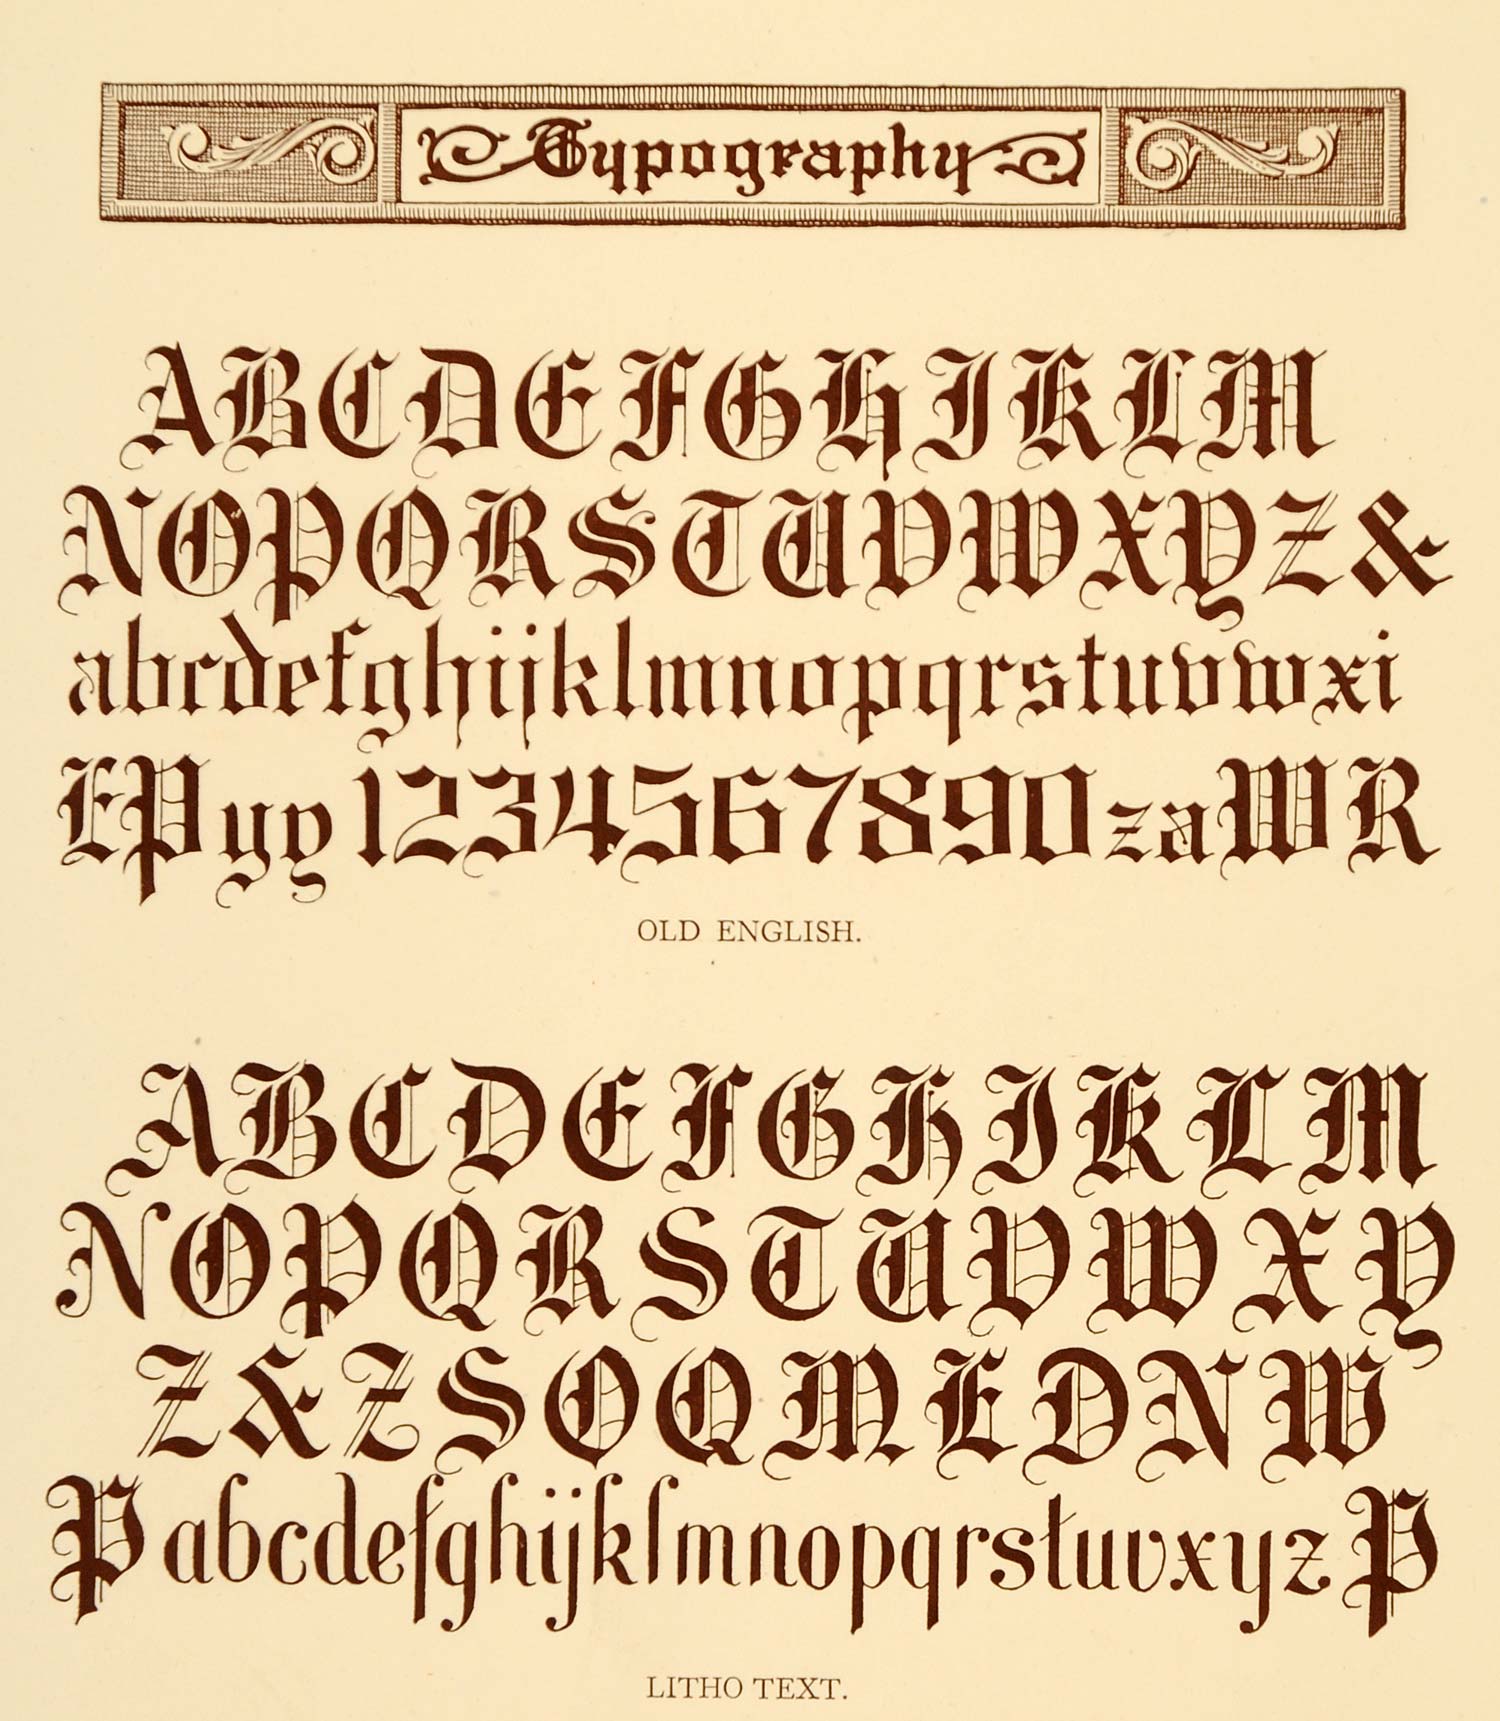 File:Old English typeface.svg - Wikibooks, open books for an open world